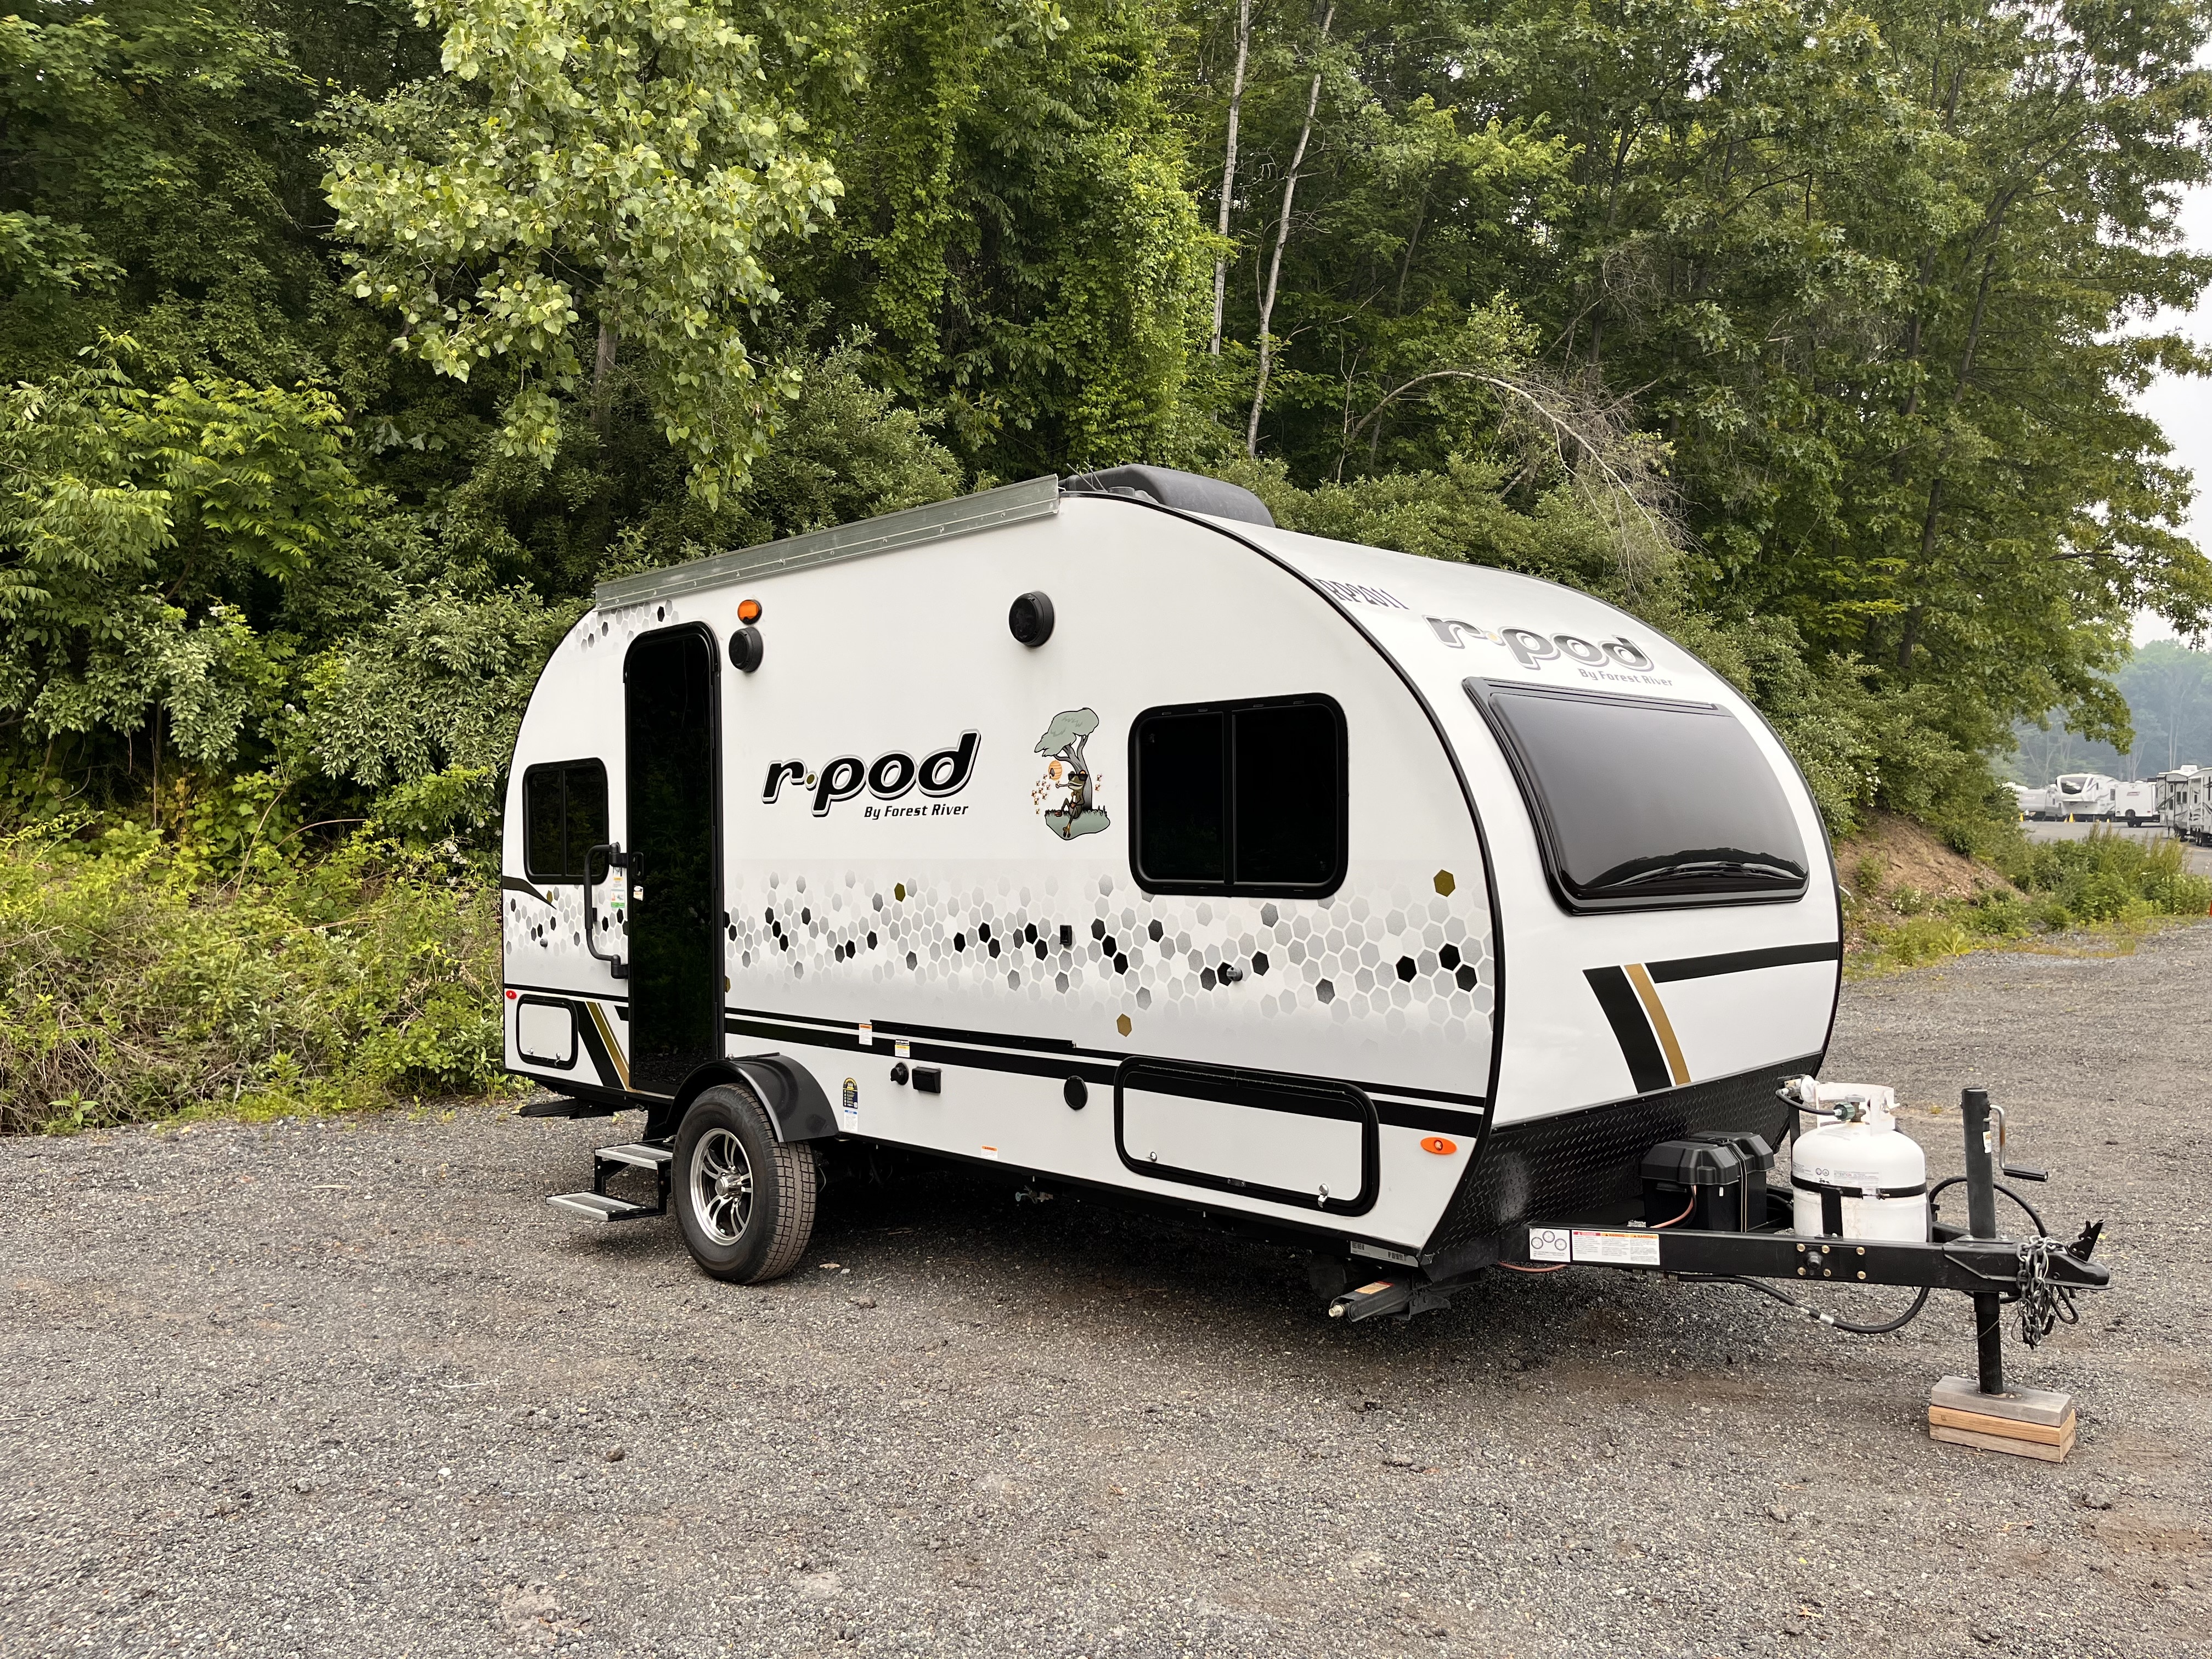 2021 FOREST RIVER R-POD RP 190 for Rental at 84 RV Rentals